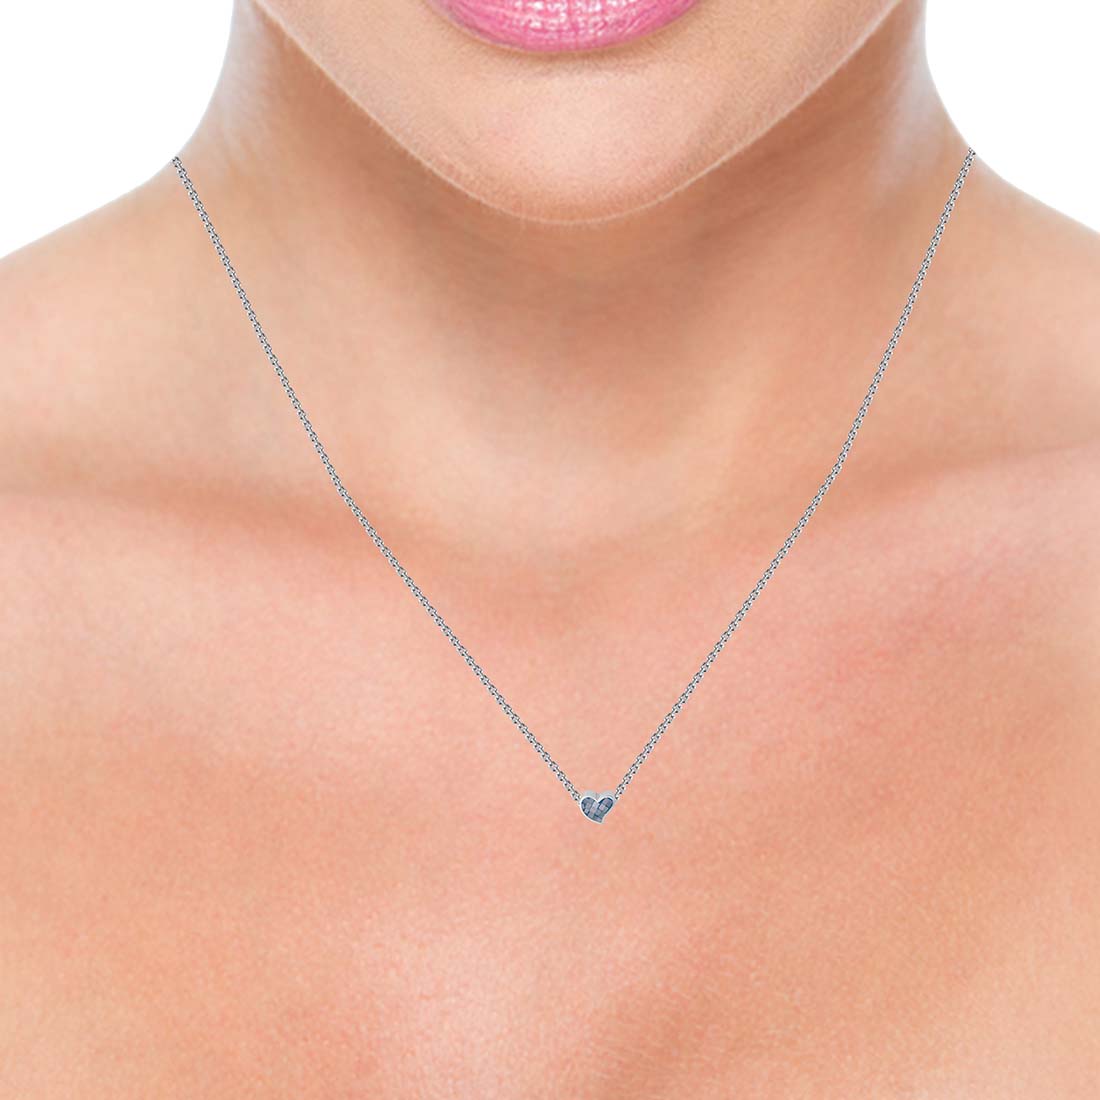 Silver Blue Heart Pendant With Chain For Women & Girls